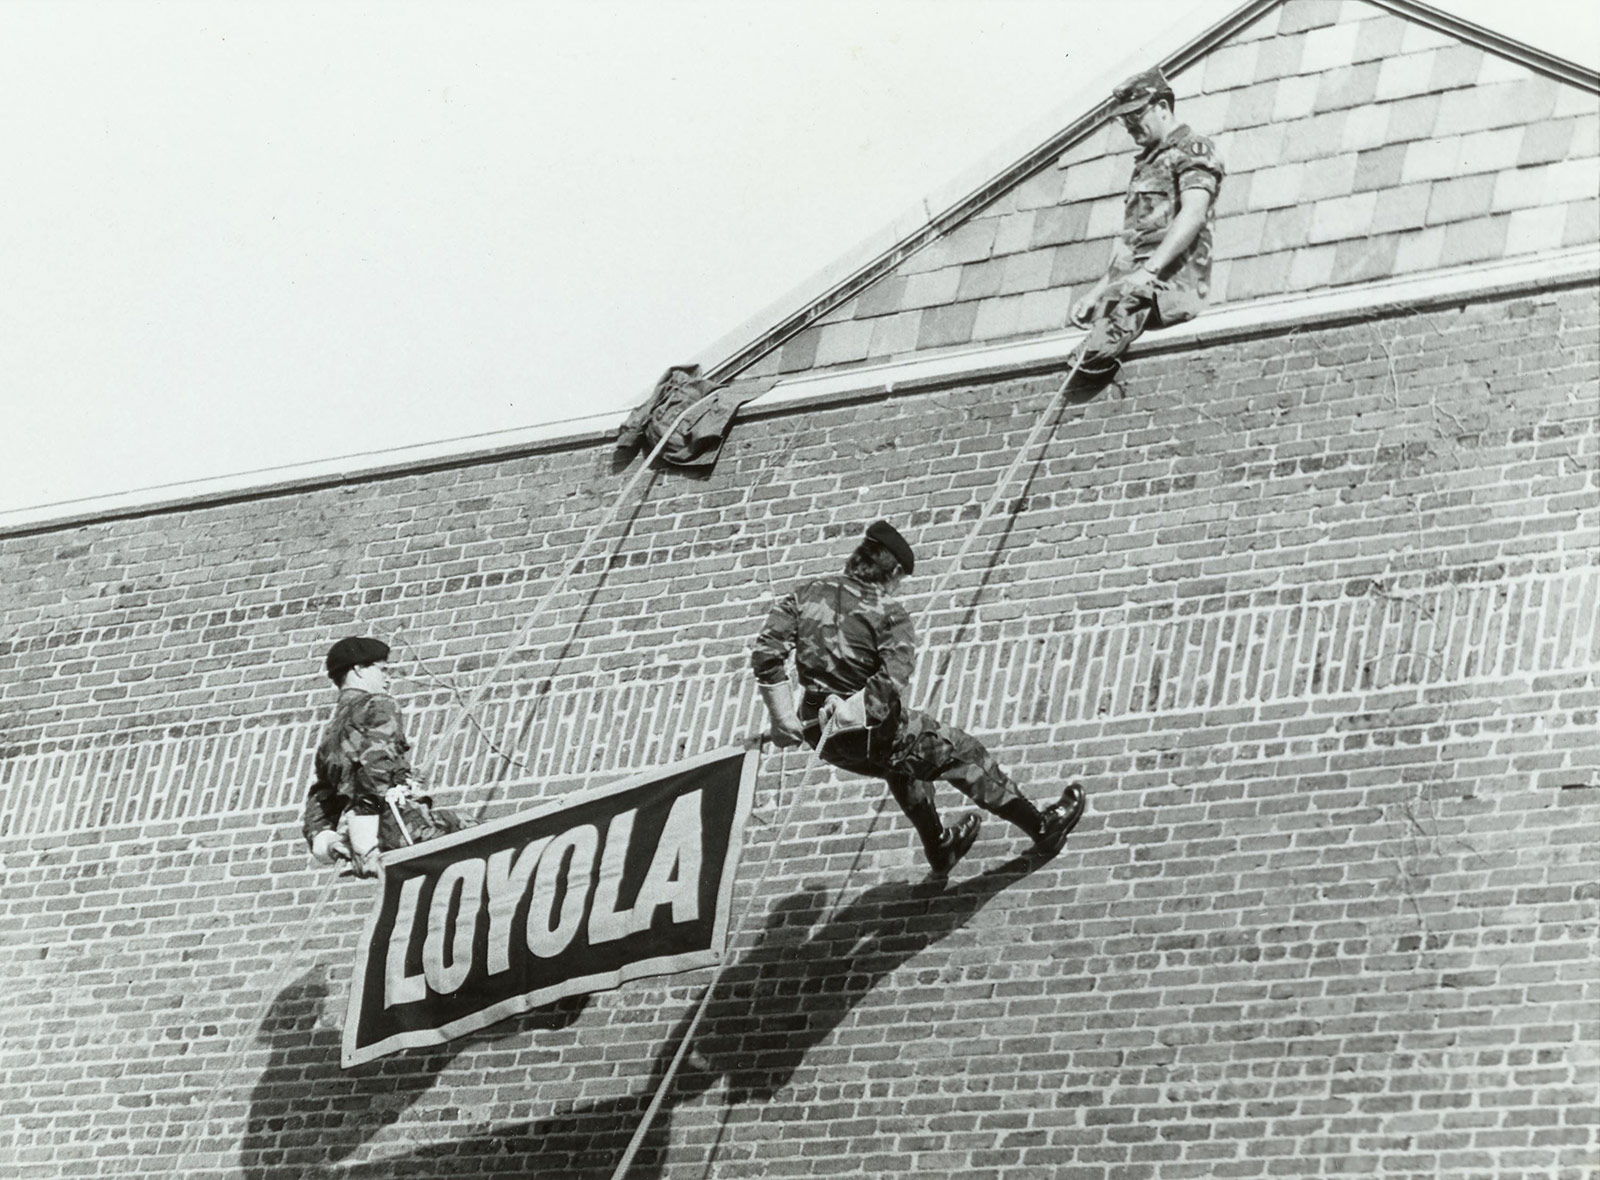 ROTC cadets rappelling down the side of the building with a Loyola banner